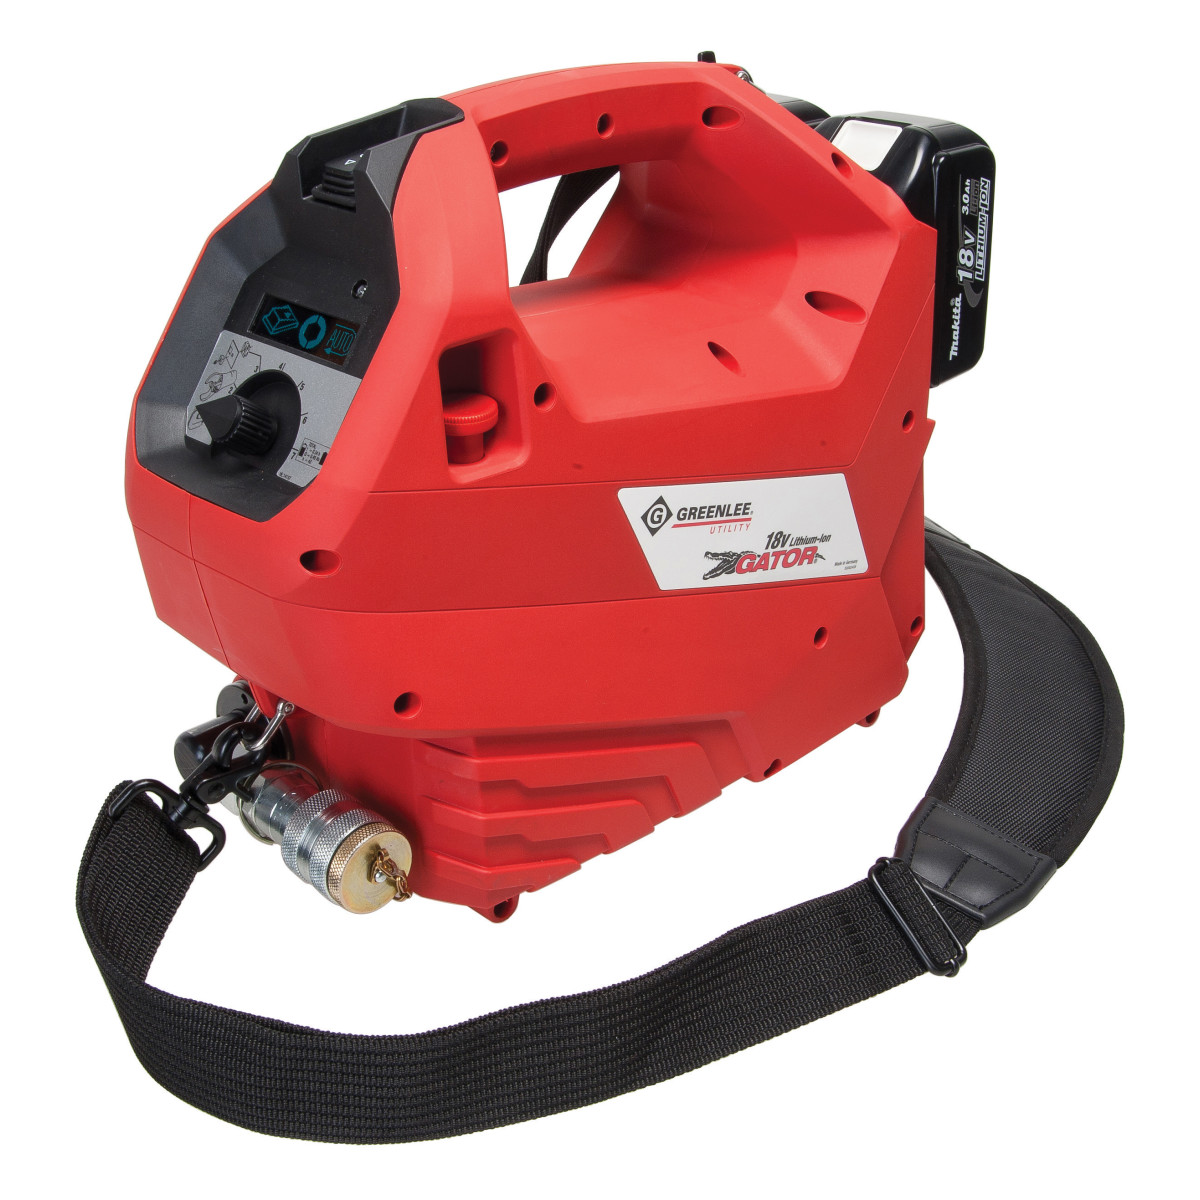 Battery Powered Hydraulic Pump with 230V Adapter.  Operates with any 10K PSI single acting remote heads.  3 in 1 pressure specific program settings for crimping cutting and punching.  Dashboard display provides real time monitoring of operation.  On-board and remote rocker switches for pump activation.